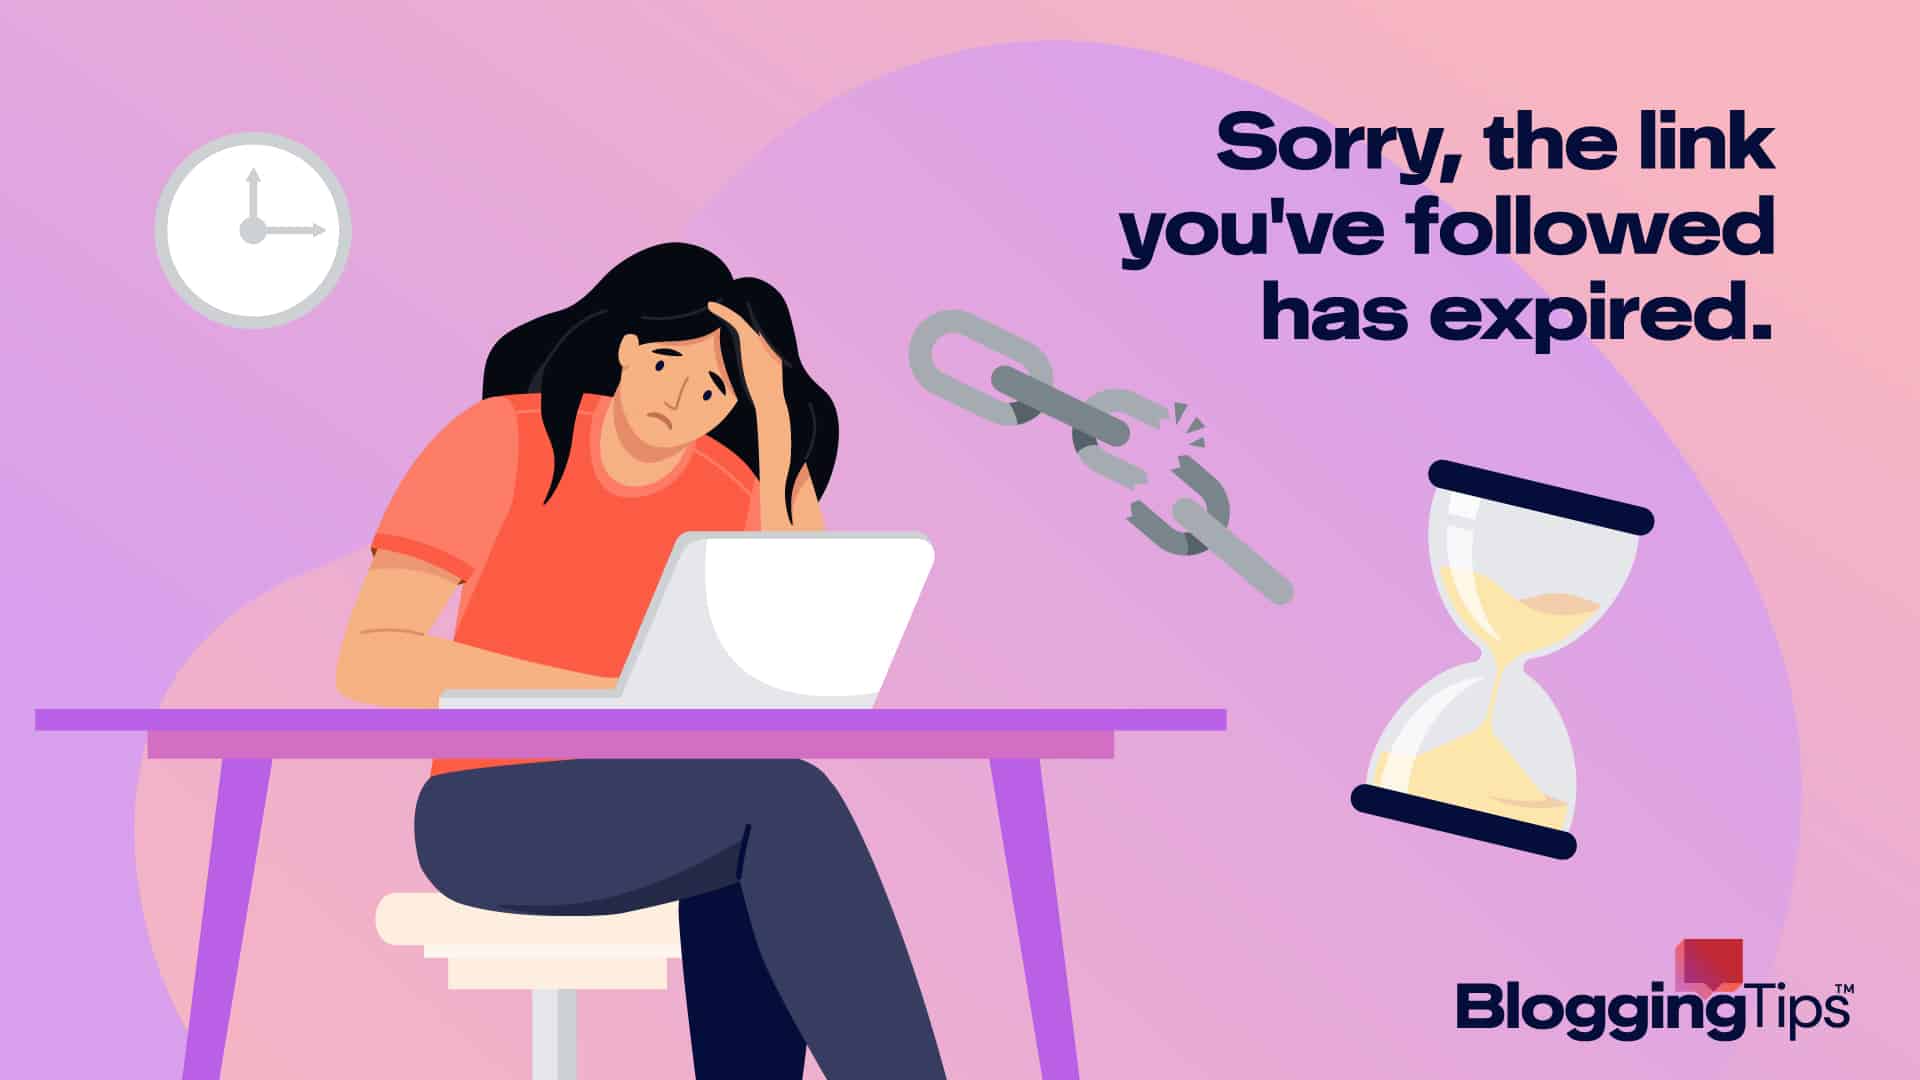 vector graphic showing an illustration of a woman learning the link you followed has expired